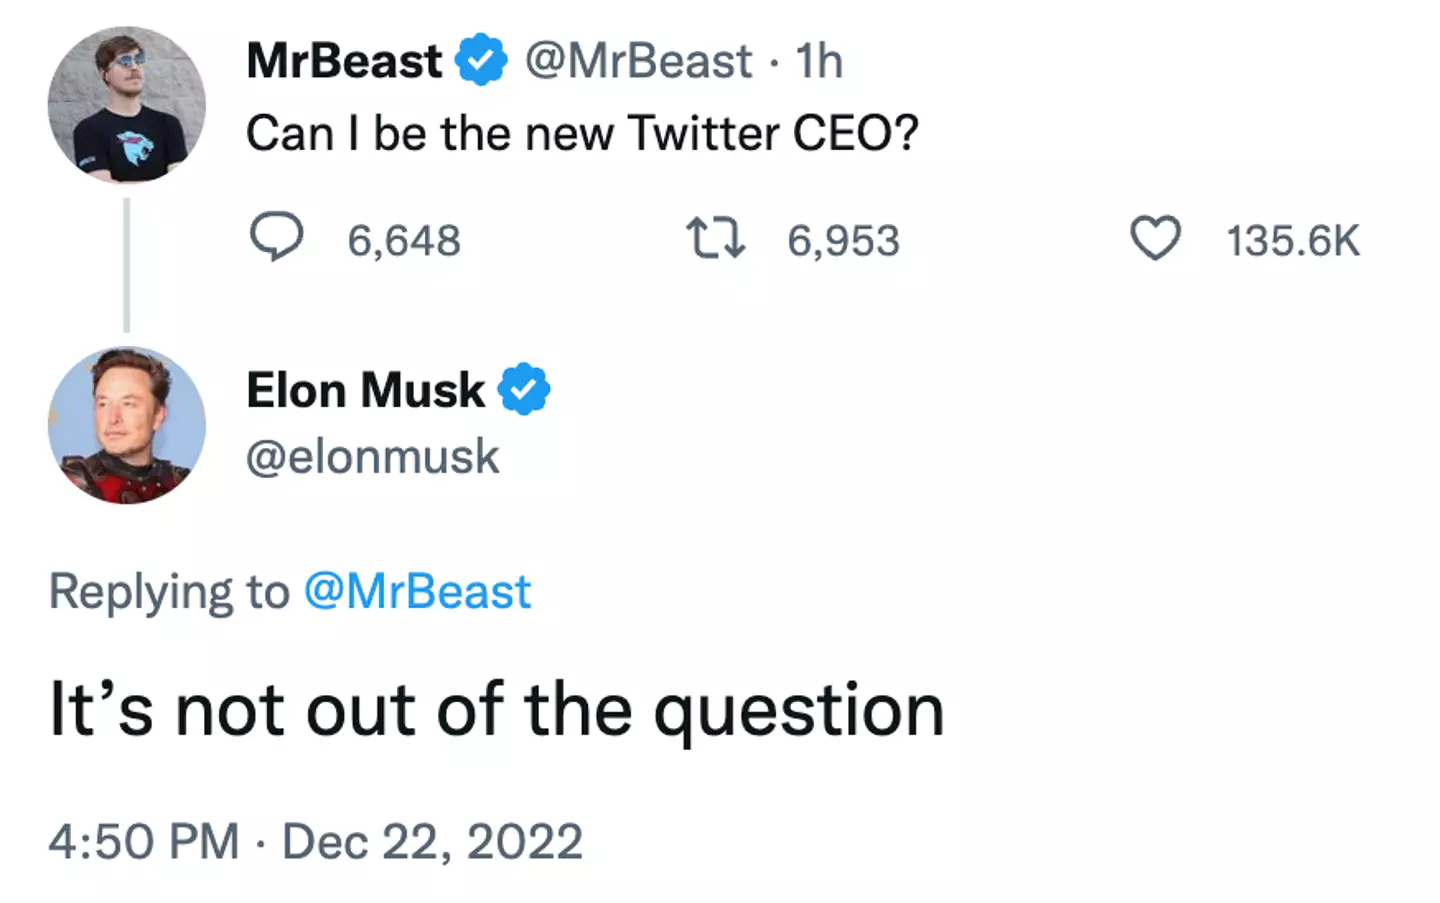 MrBeast has thrown his hat in the ring to be Twitter's next CEO.